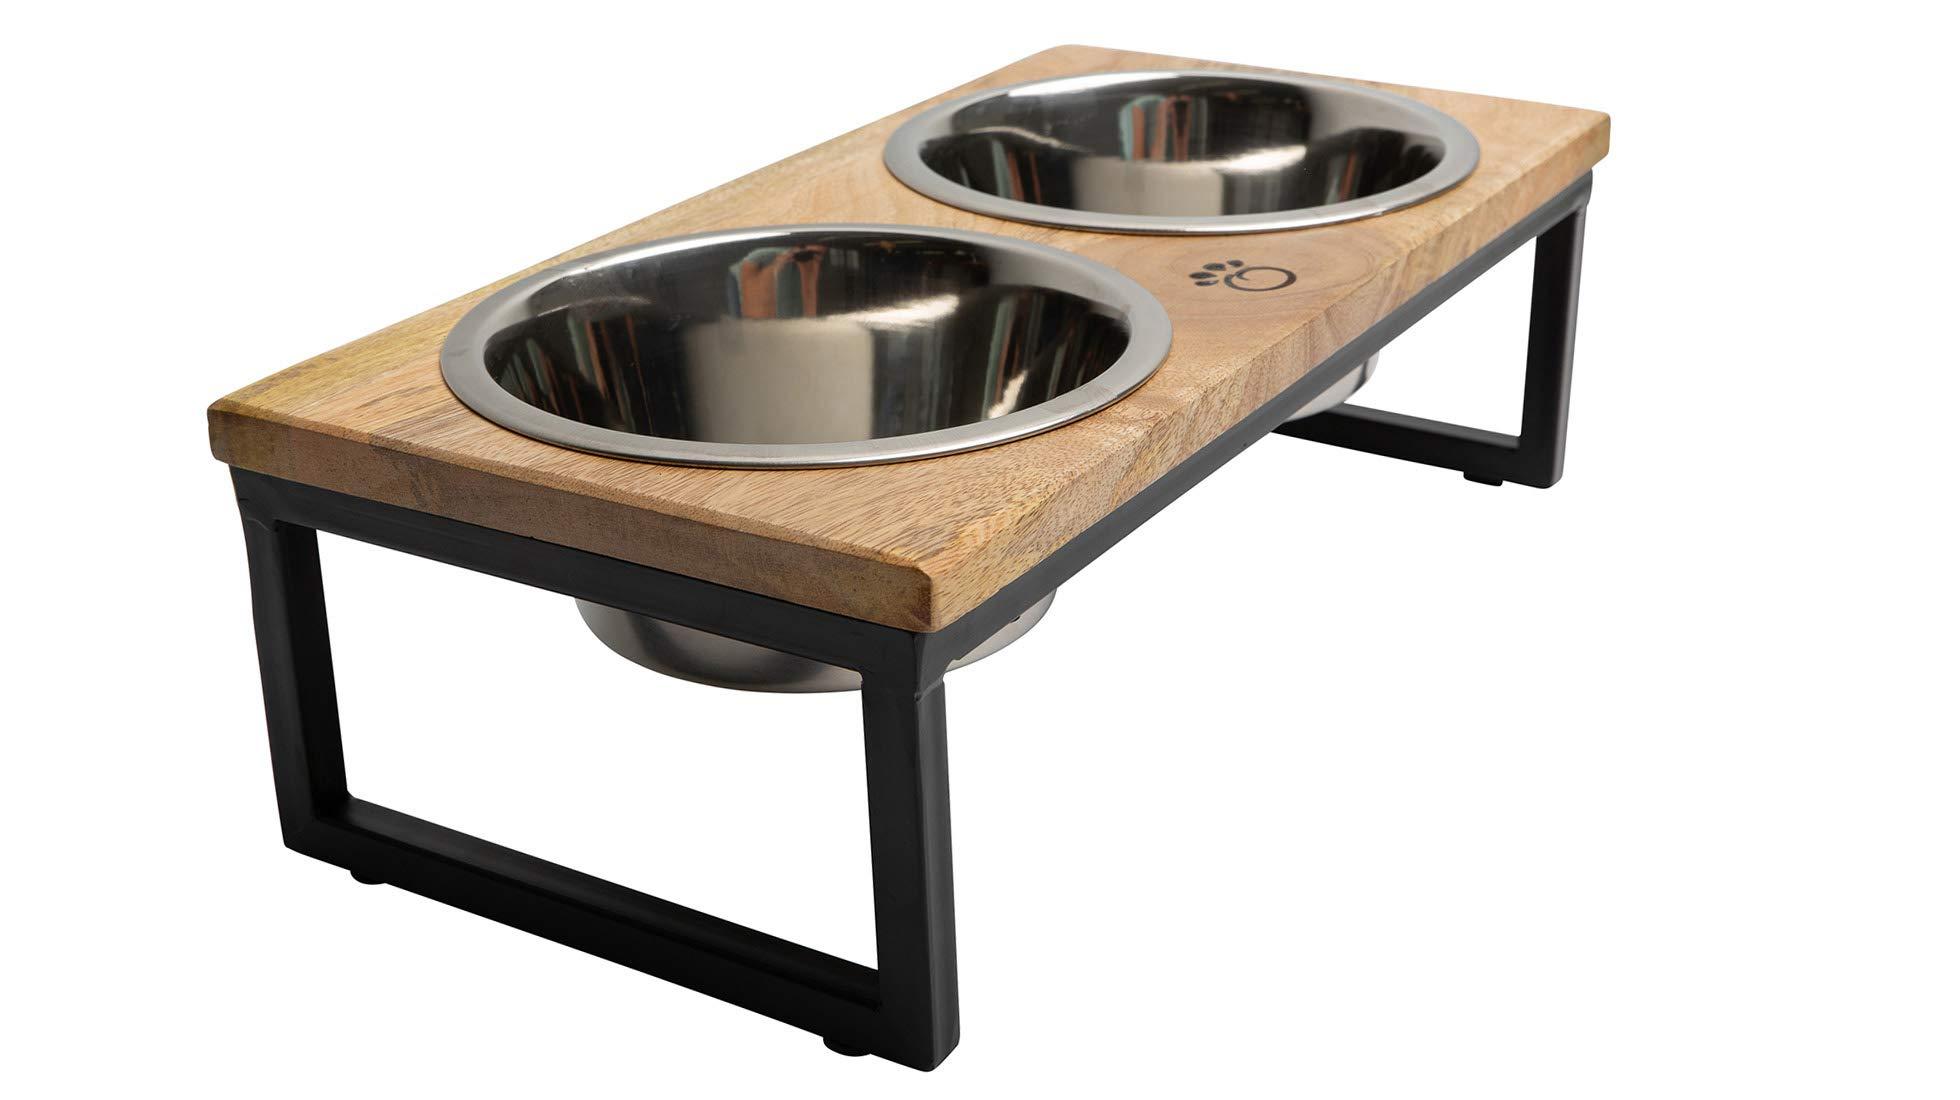 Brave Bark Wood & Metal Feeder - Premium Mango Wood Feeder with Metal Stand, 2 Stainless Steel Bowls for Food or Water Included, Perfect for Dogs, Cats and Pets of Any Size, for Home or Office (Large)